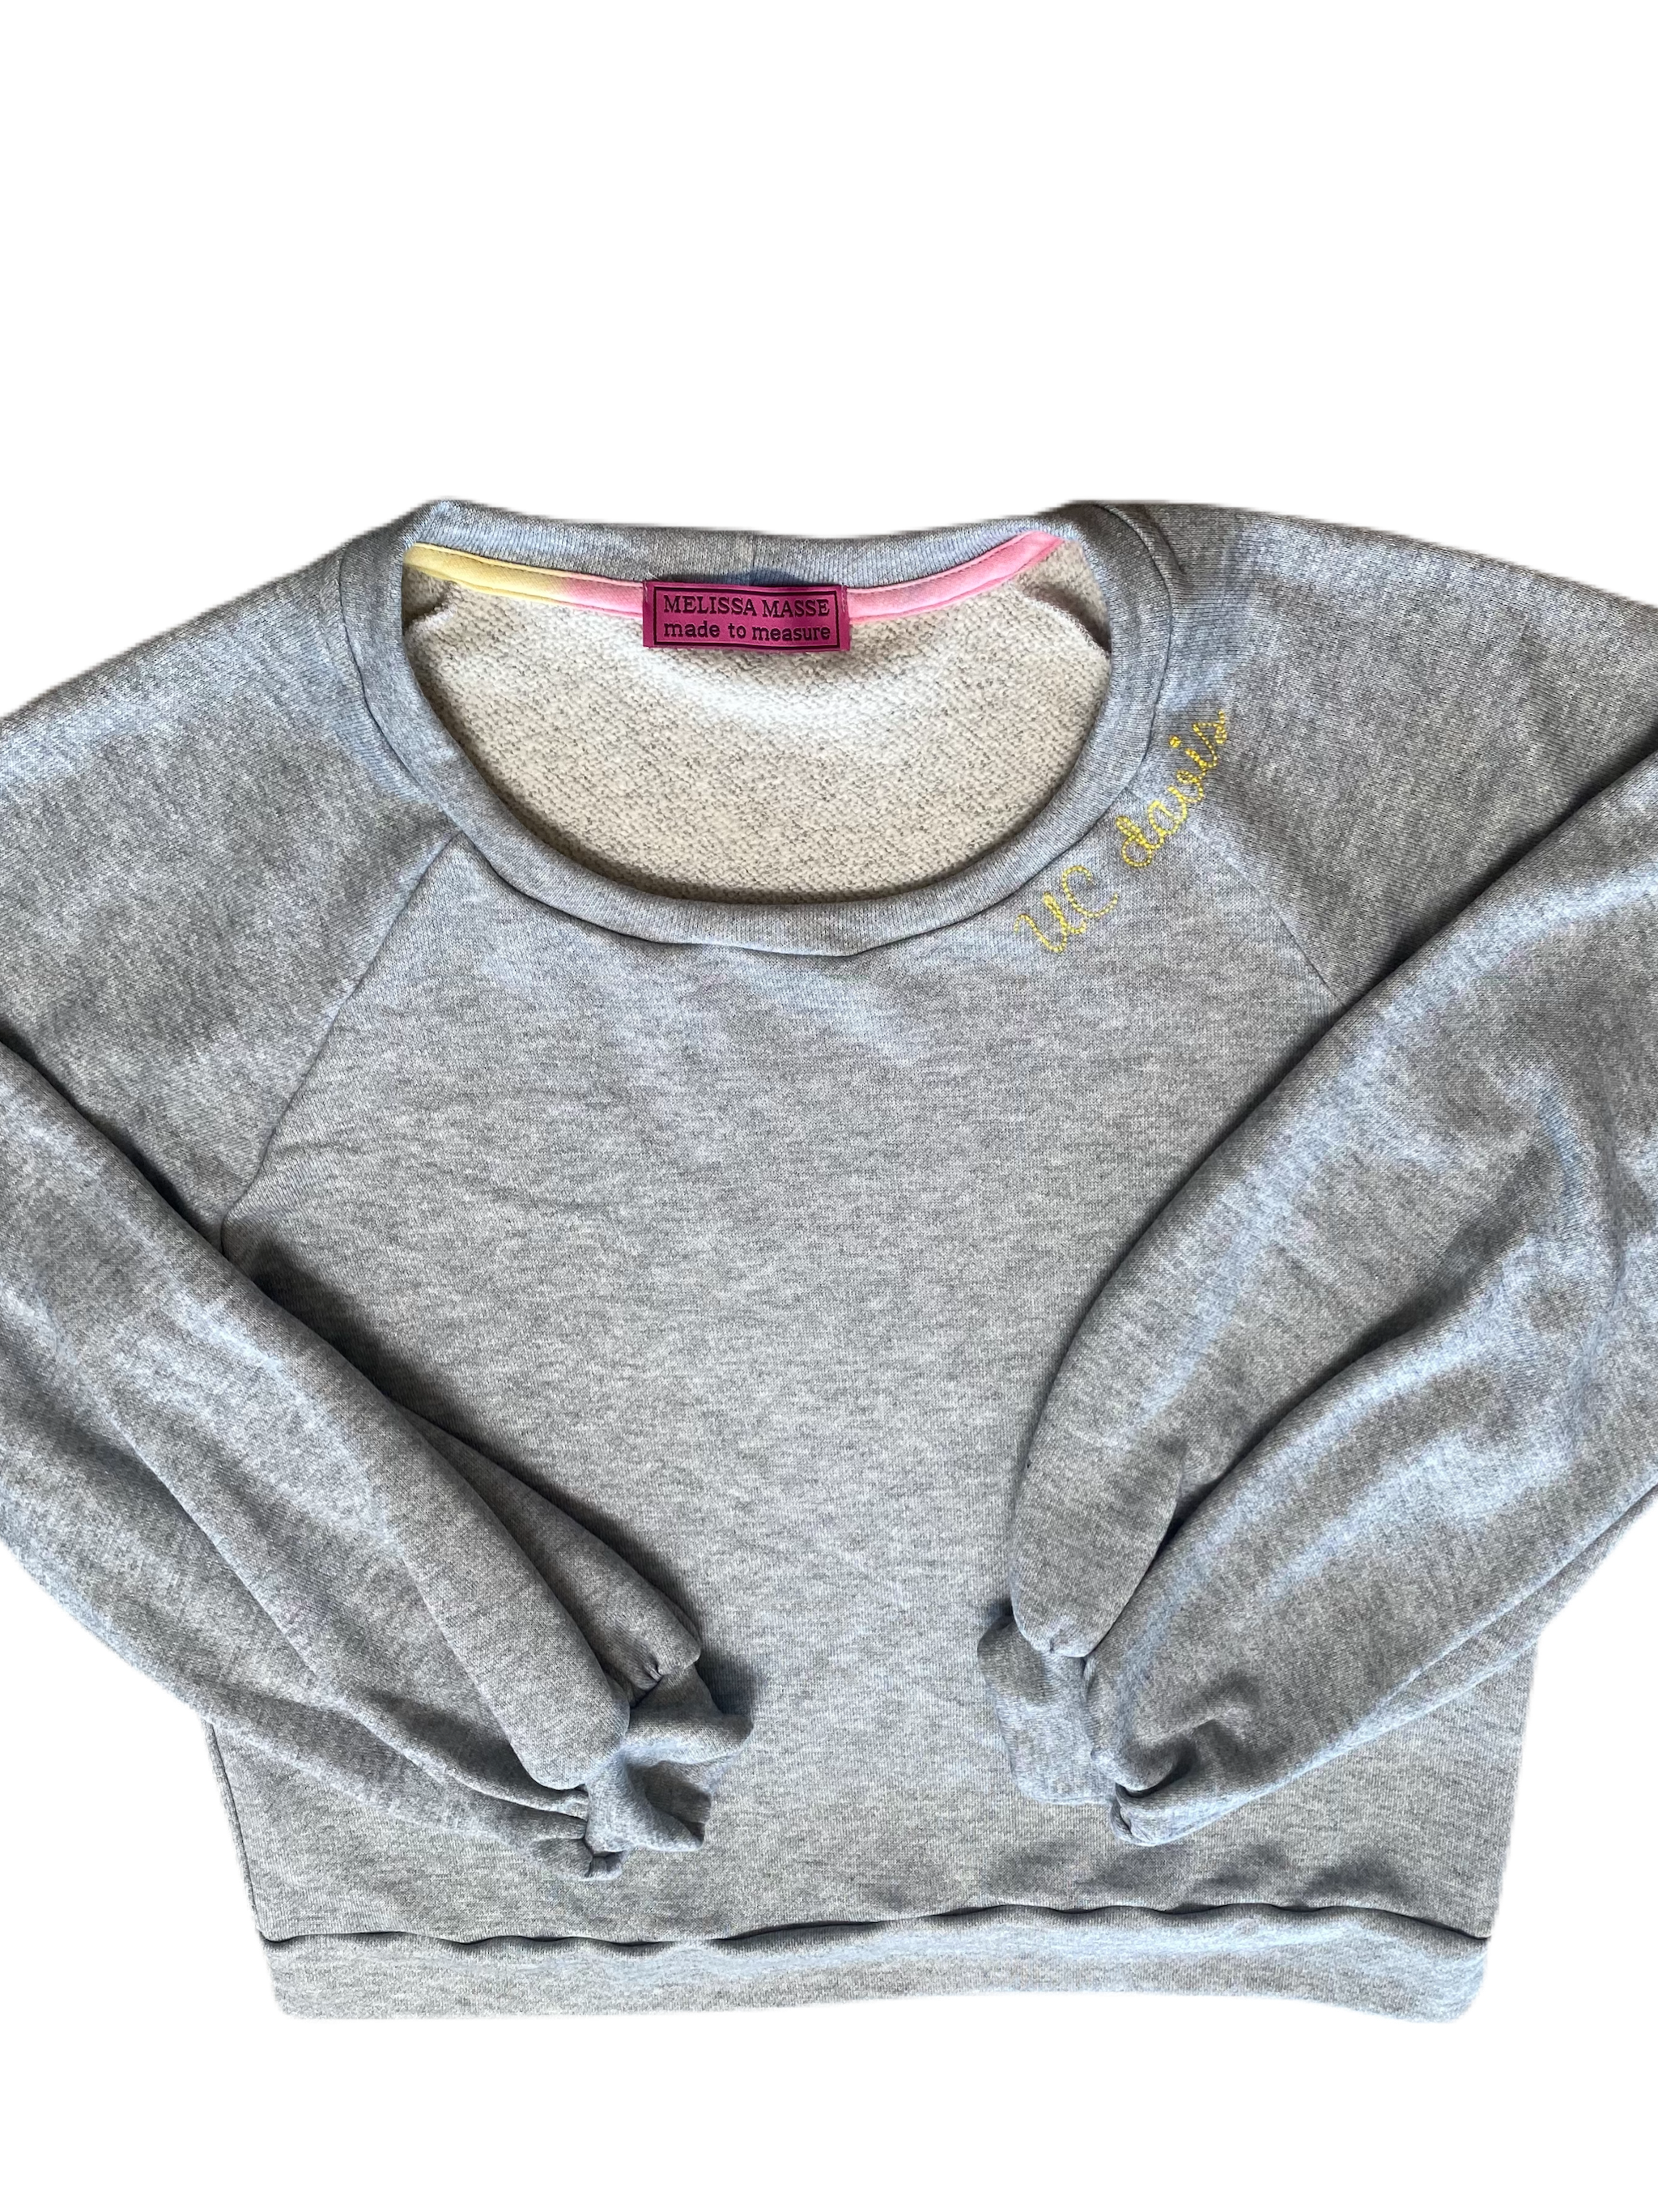 sweatshirts embroidered with school, sorority, club, or anything you want!